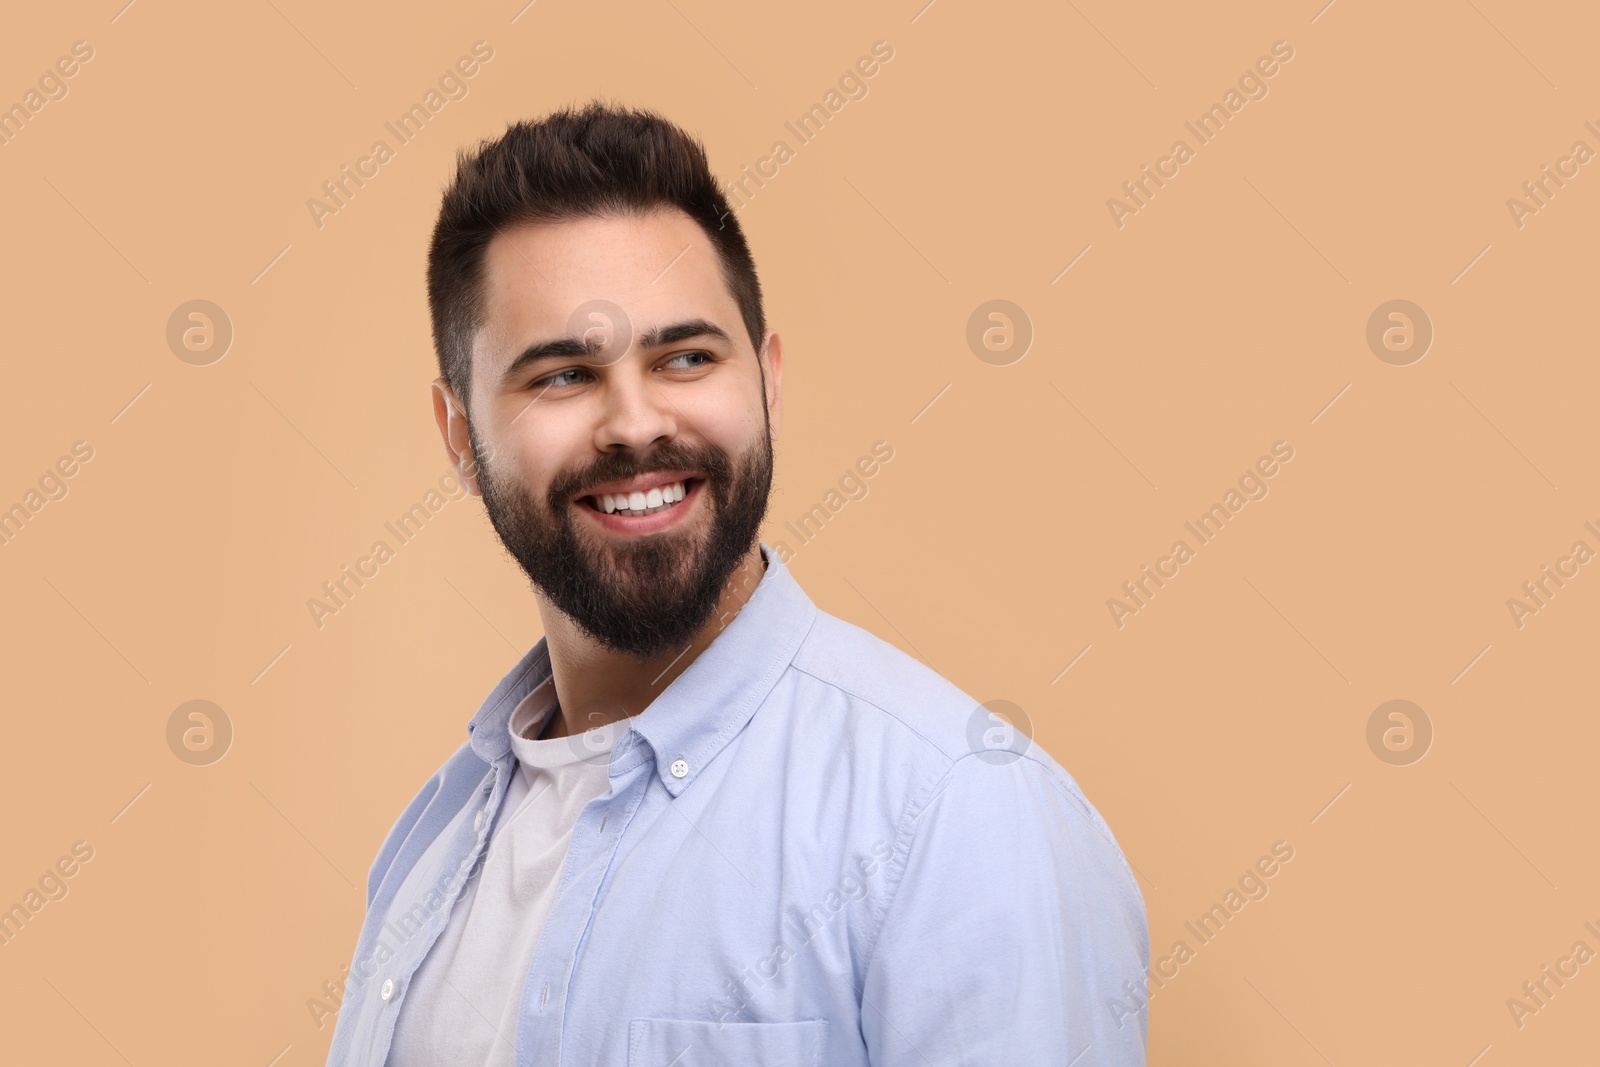 Photo of Man with clean teeth smiling on beige background